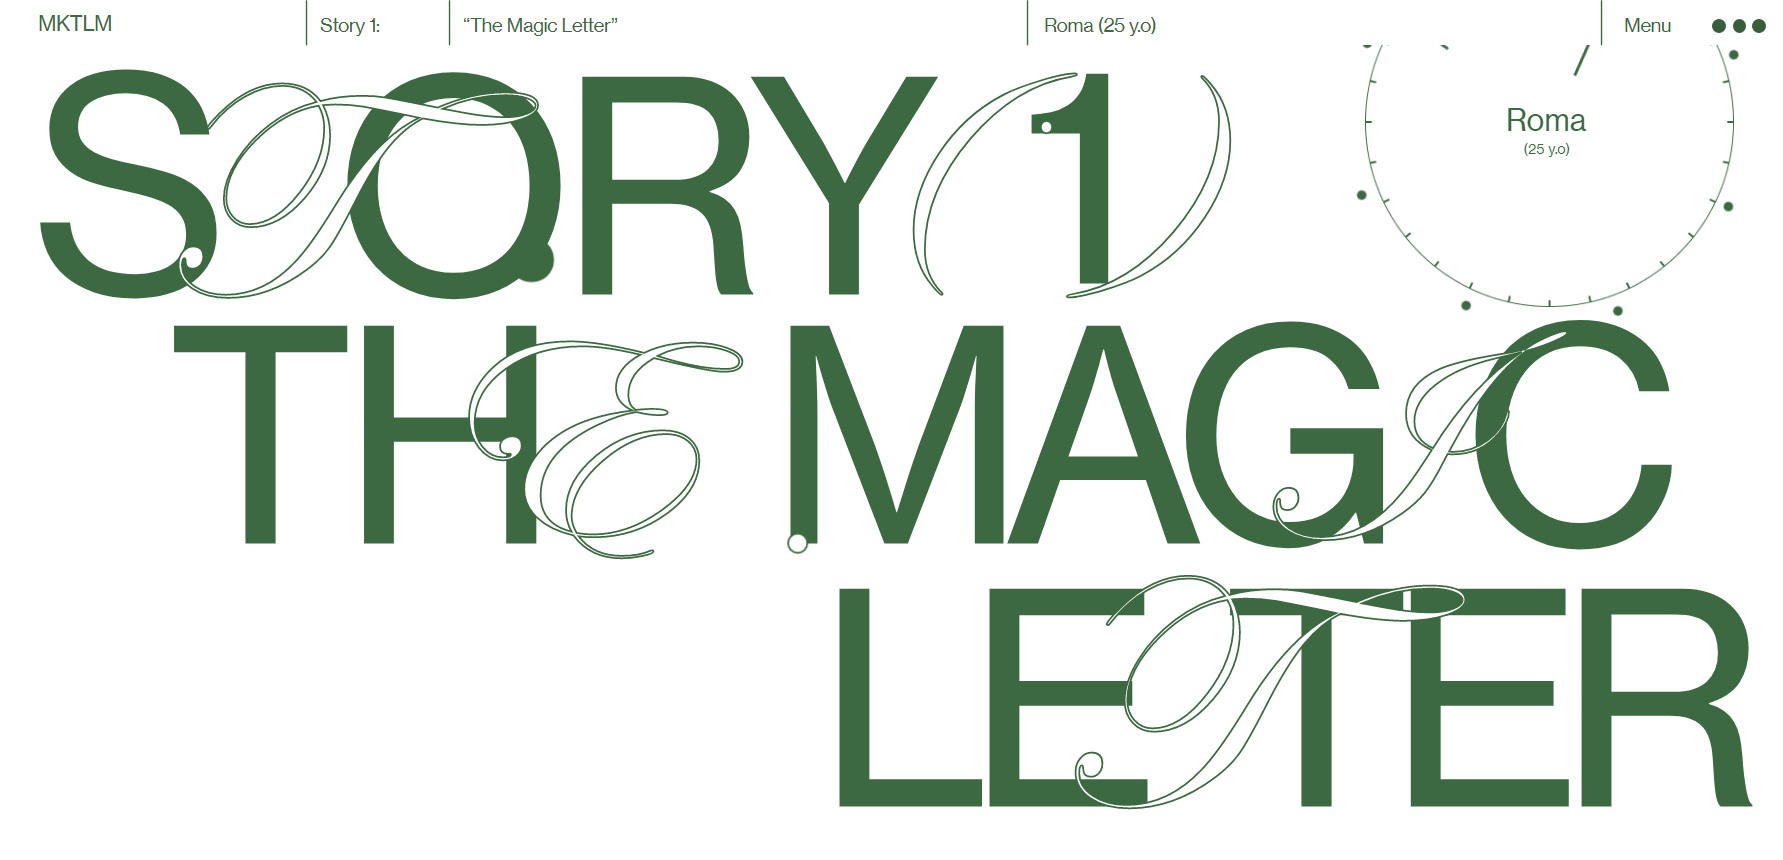 Magic key to little me - Website of the Day